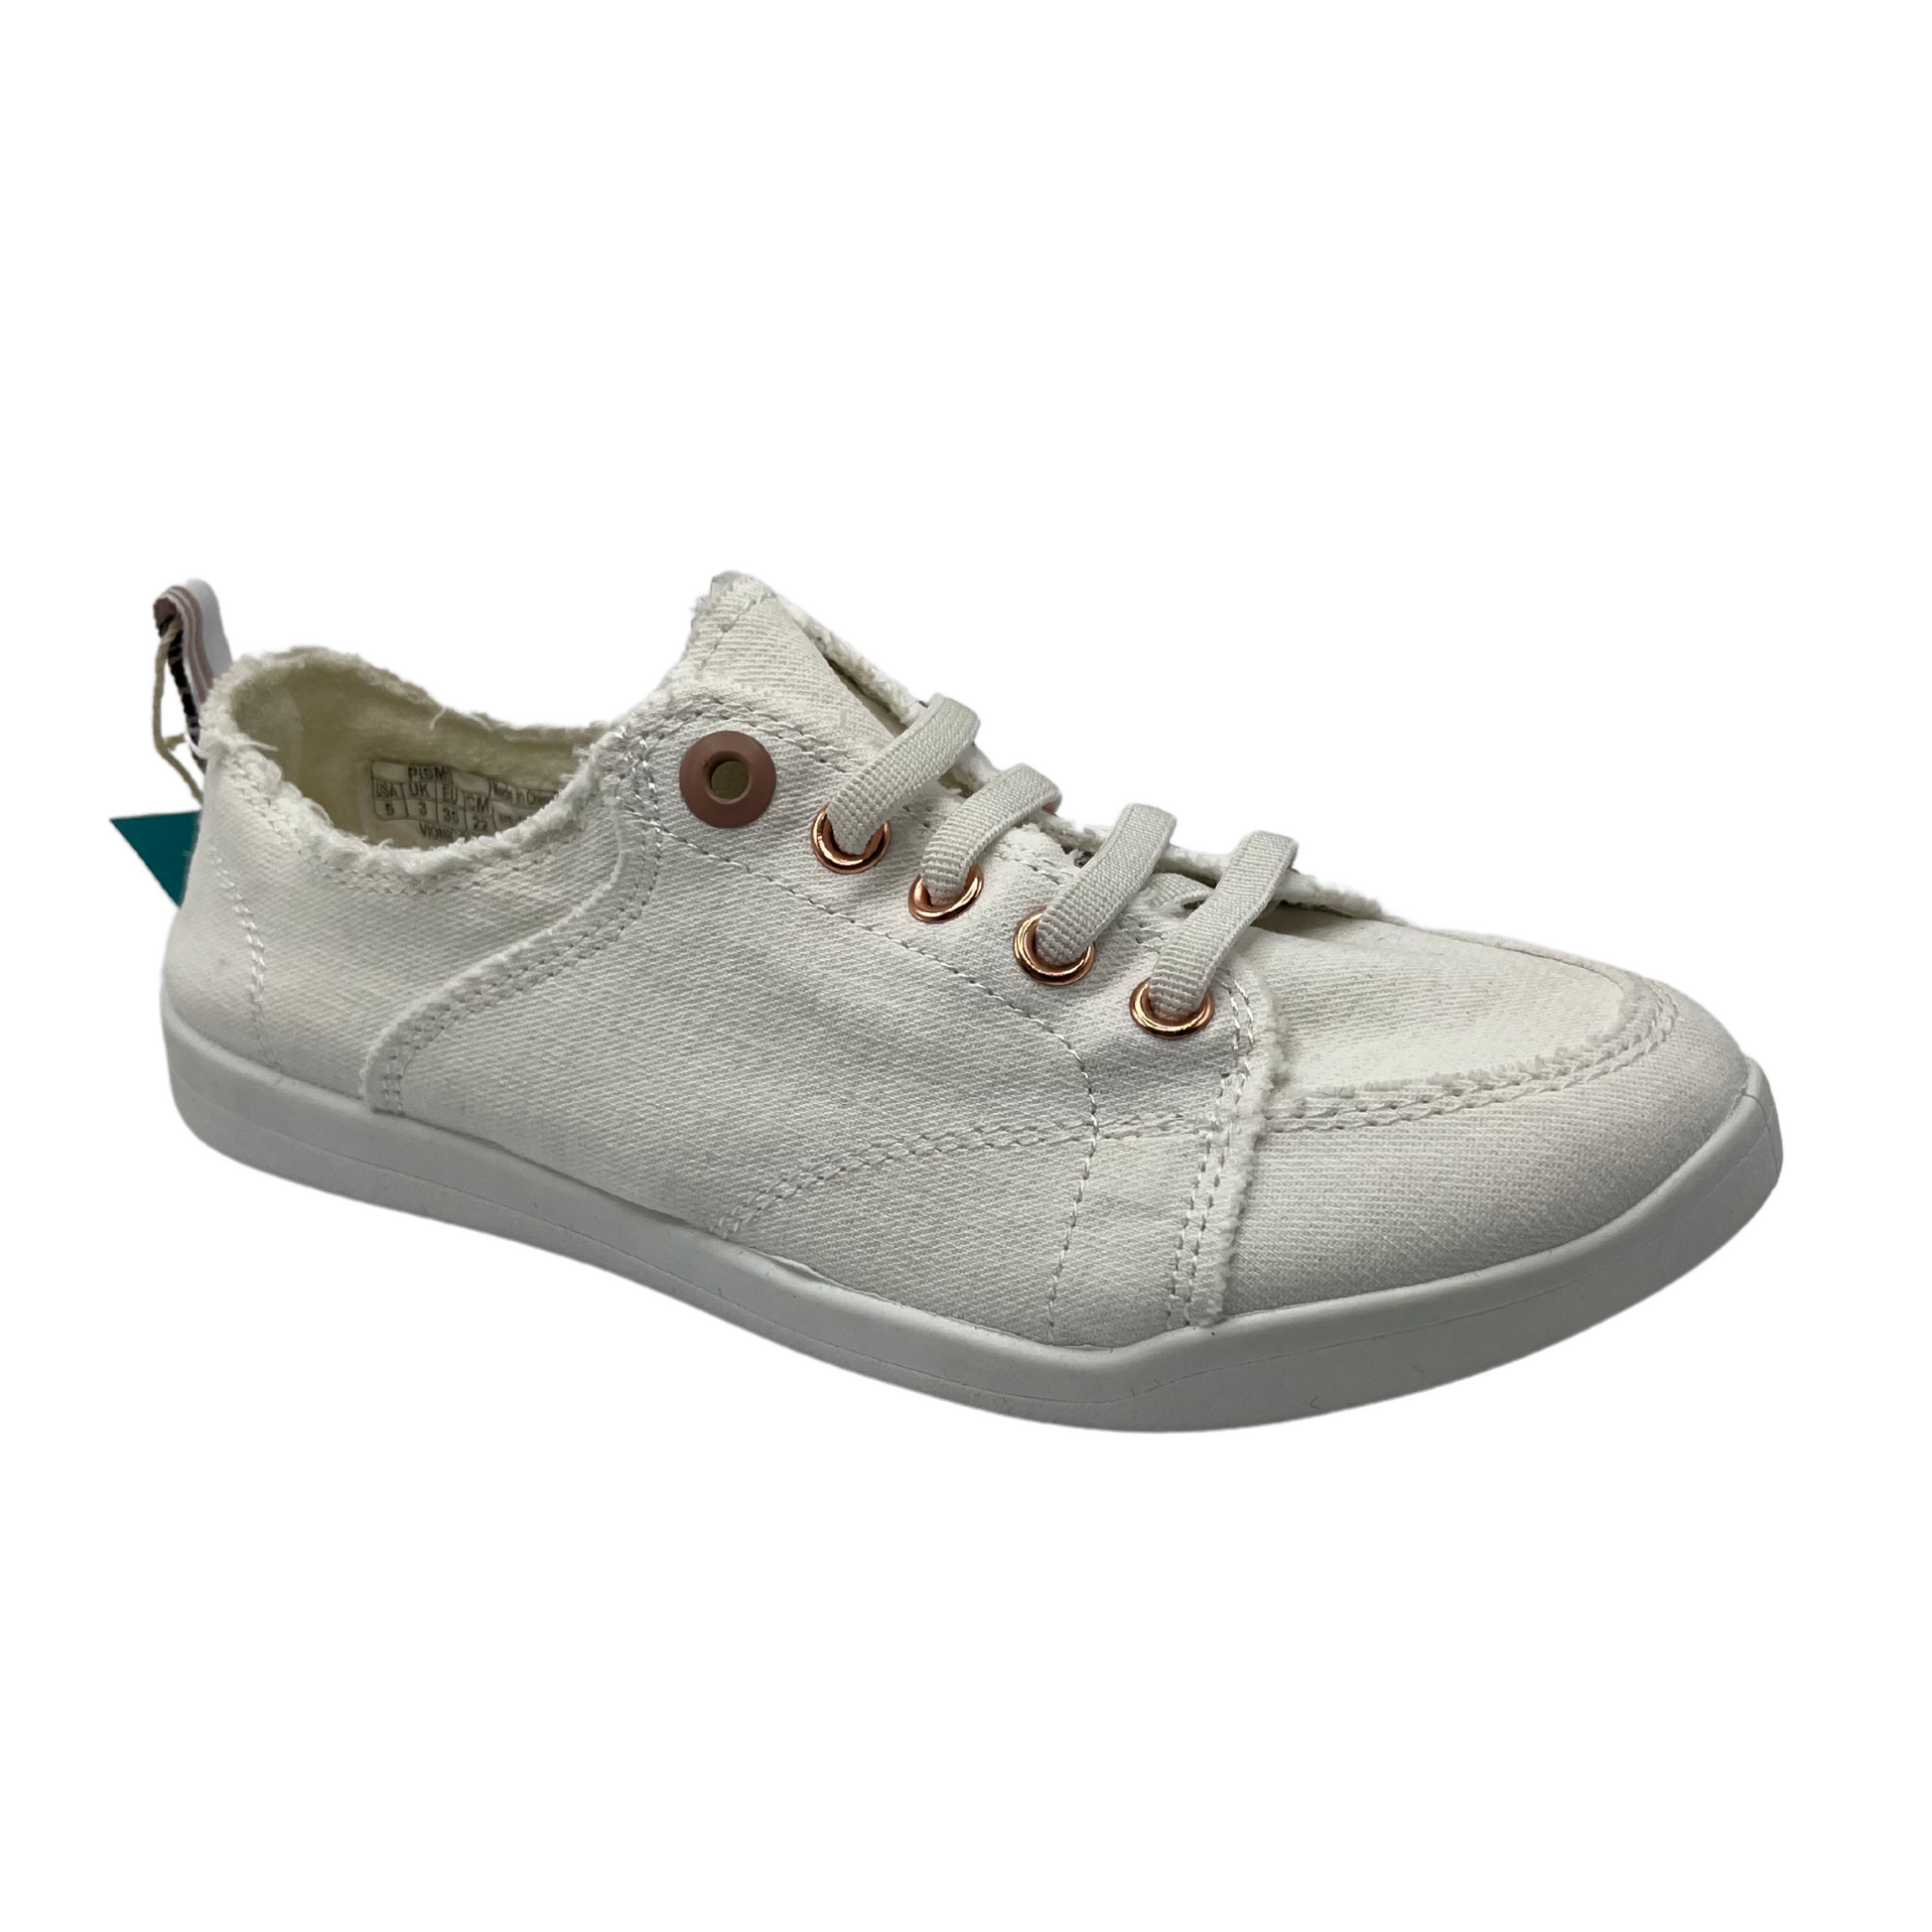 45 degree angled view of white canvas shoe with white rubber outsole and white laces